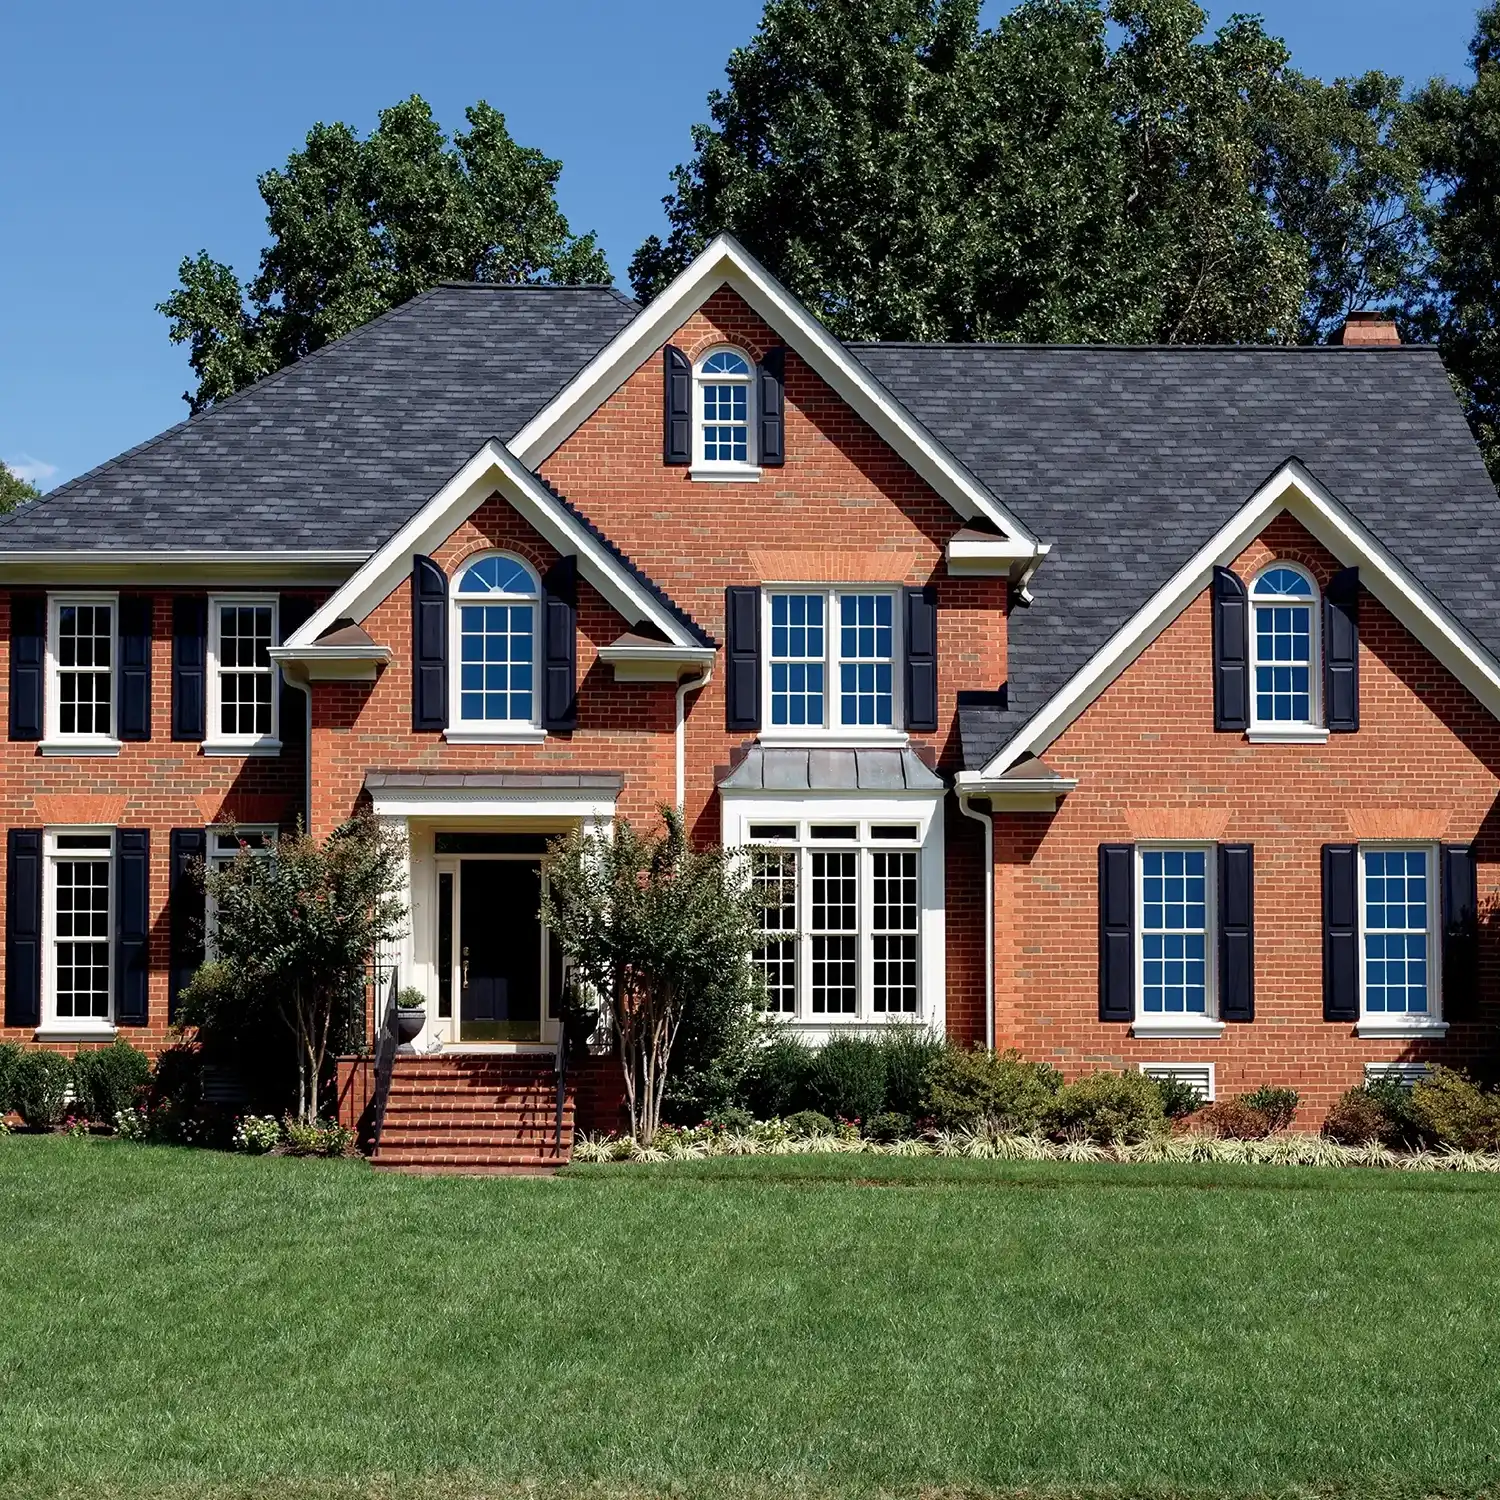 Exterior view of a brick Boston home with Marvin Replacement windows